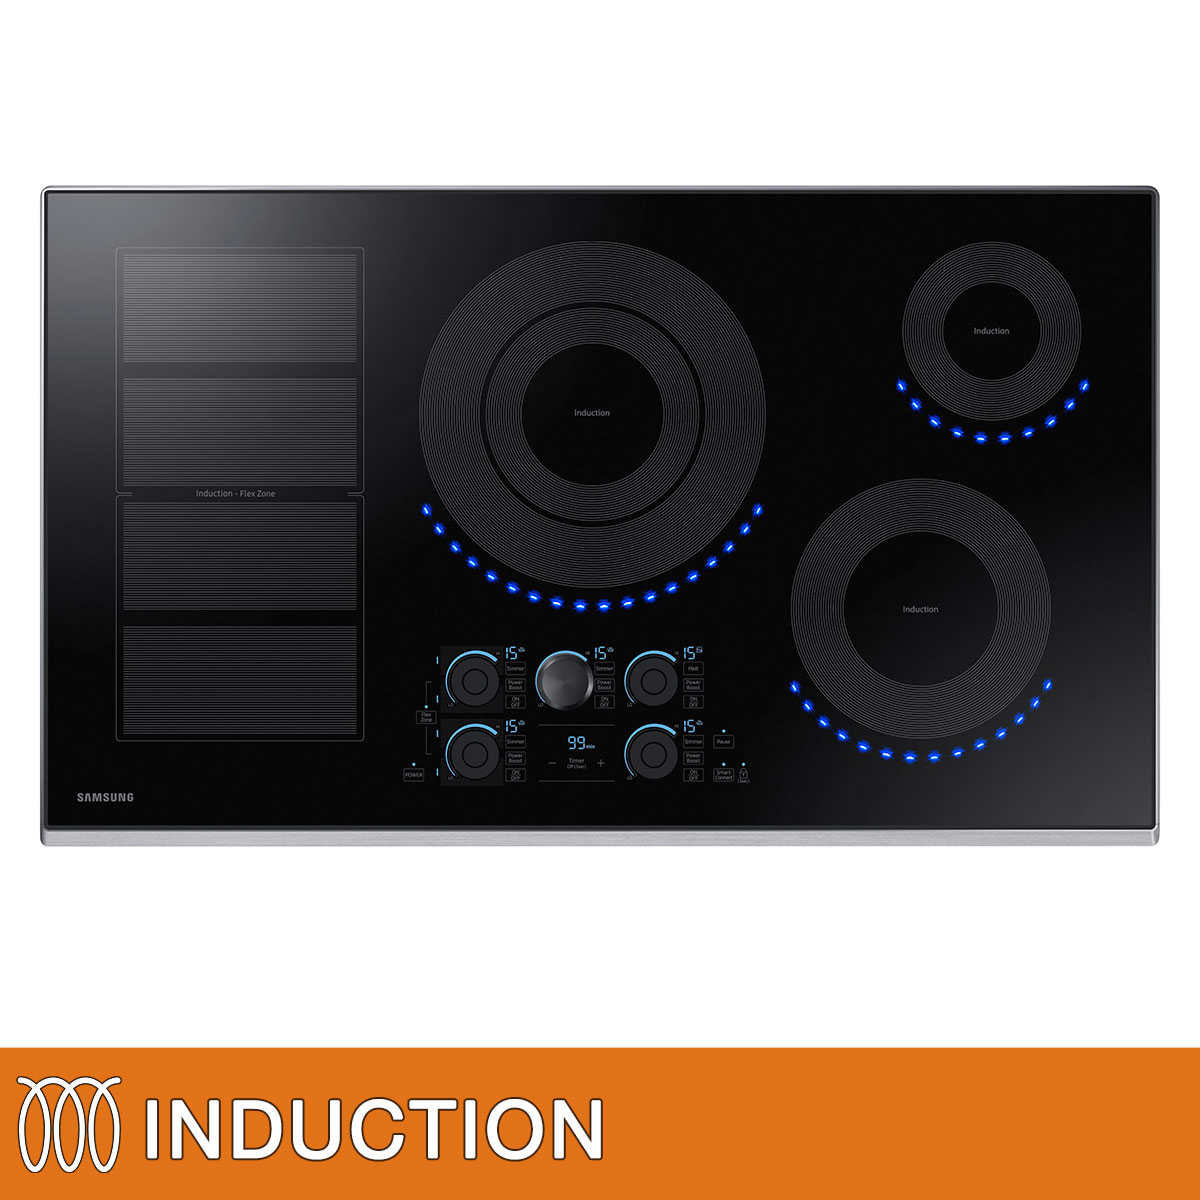 NEW - Samsung 36 in. 5-Element INDUCTION Cooktop with Wifi Connectivity Model: NZ36K7880US - Retail $2499